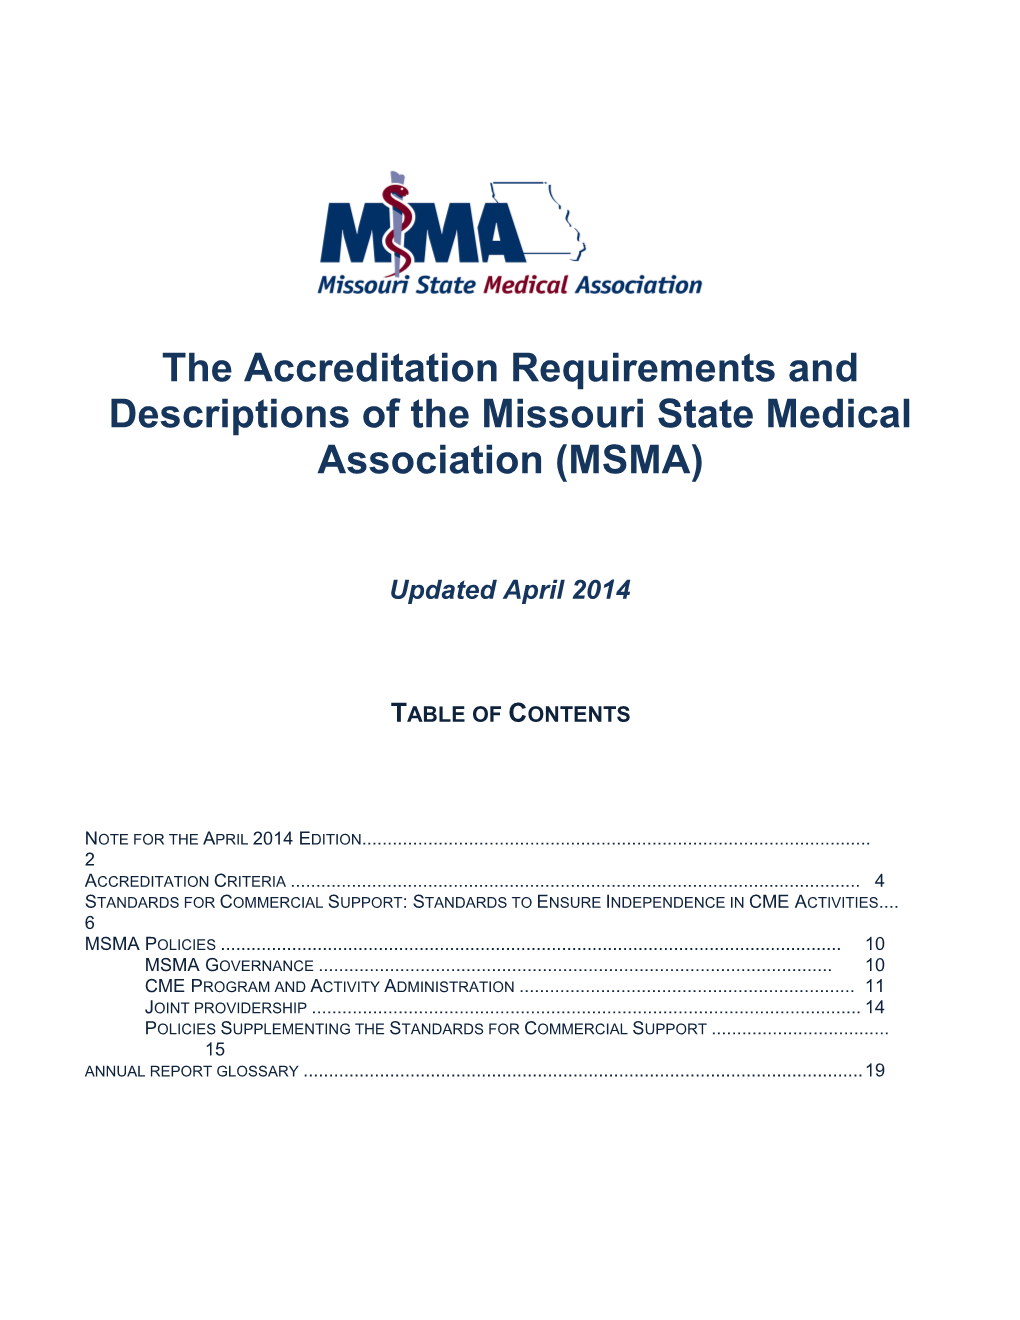 The Accreditation Requirements and Descriptions of the Accreditation Council for Continuing